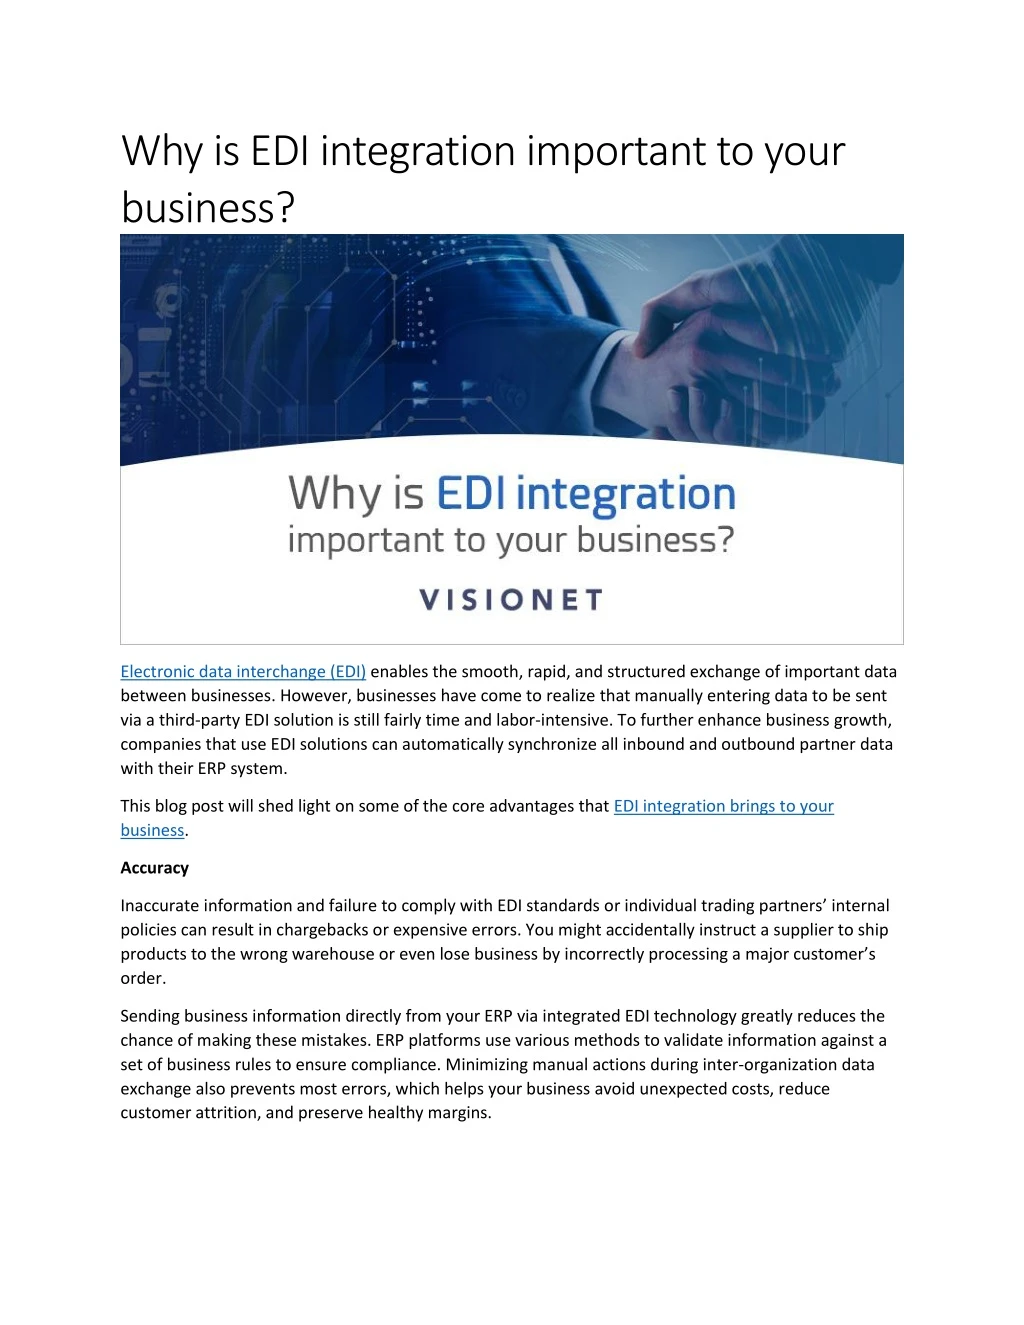 why is edi integration important to your business